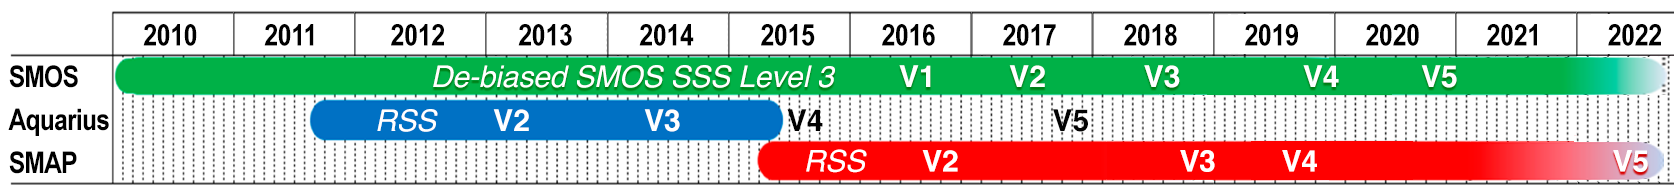 Timeline of major release dates for three examples of SSS data products